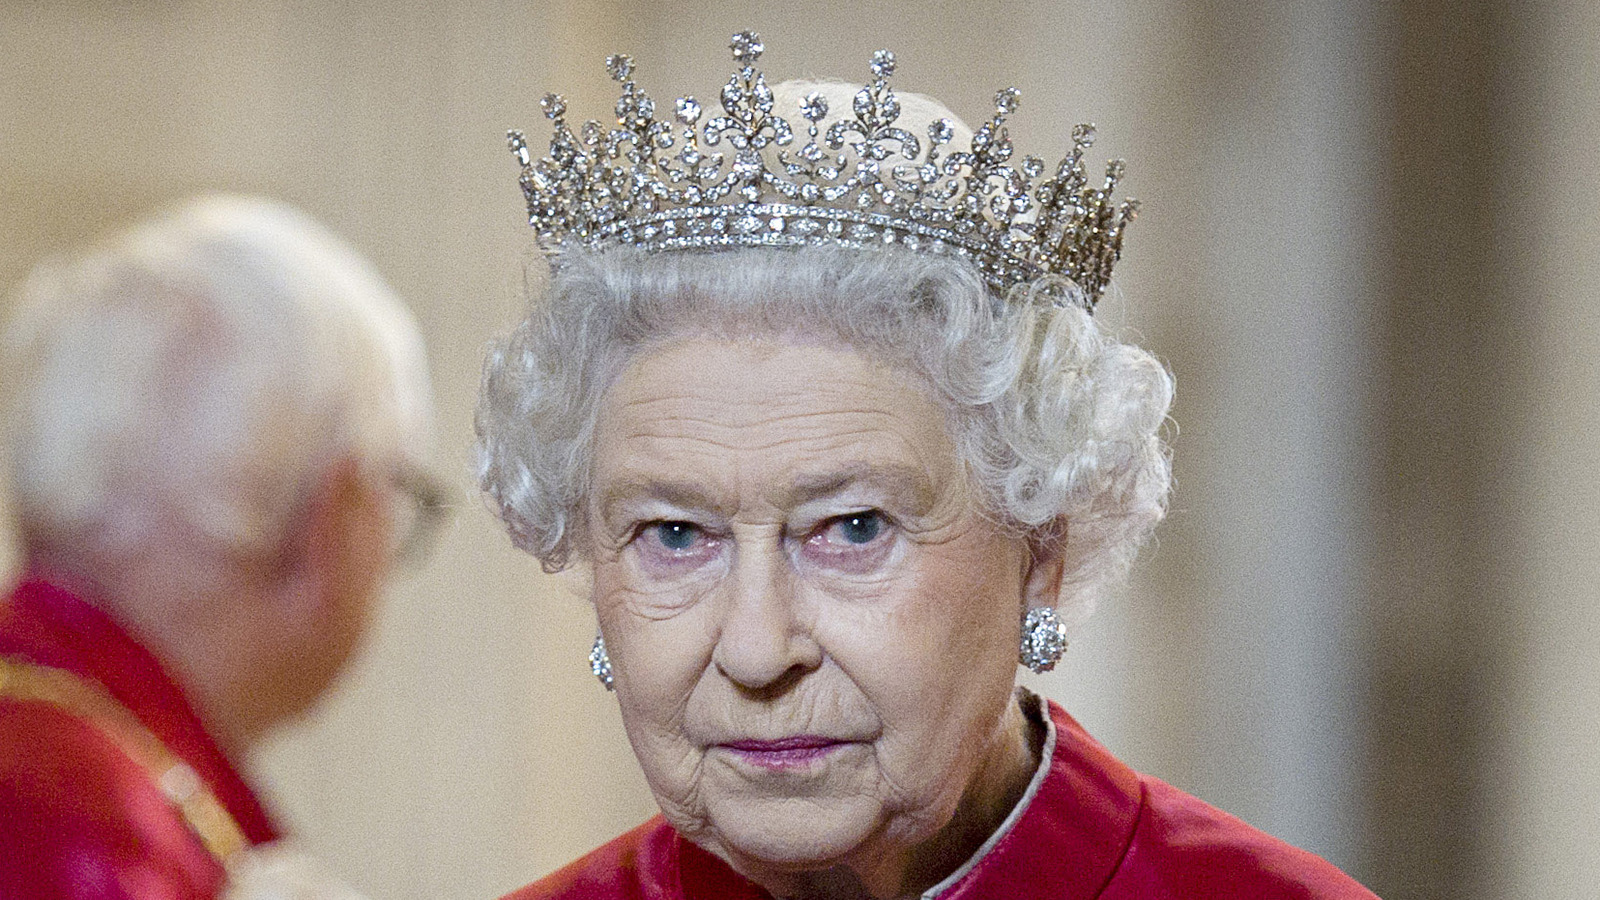 Why was Queen Elizabeth II so significant? She was remarkably common